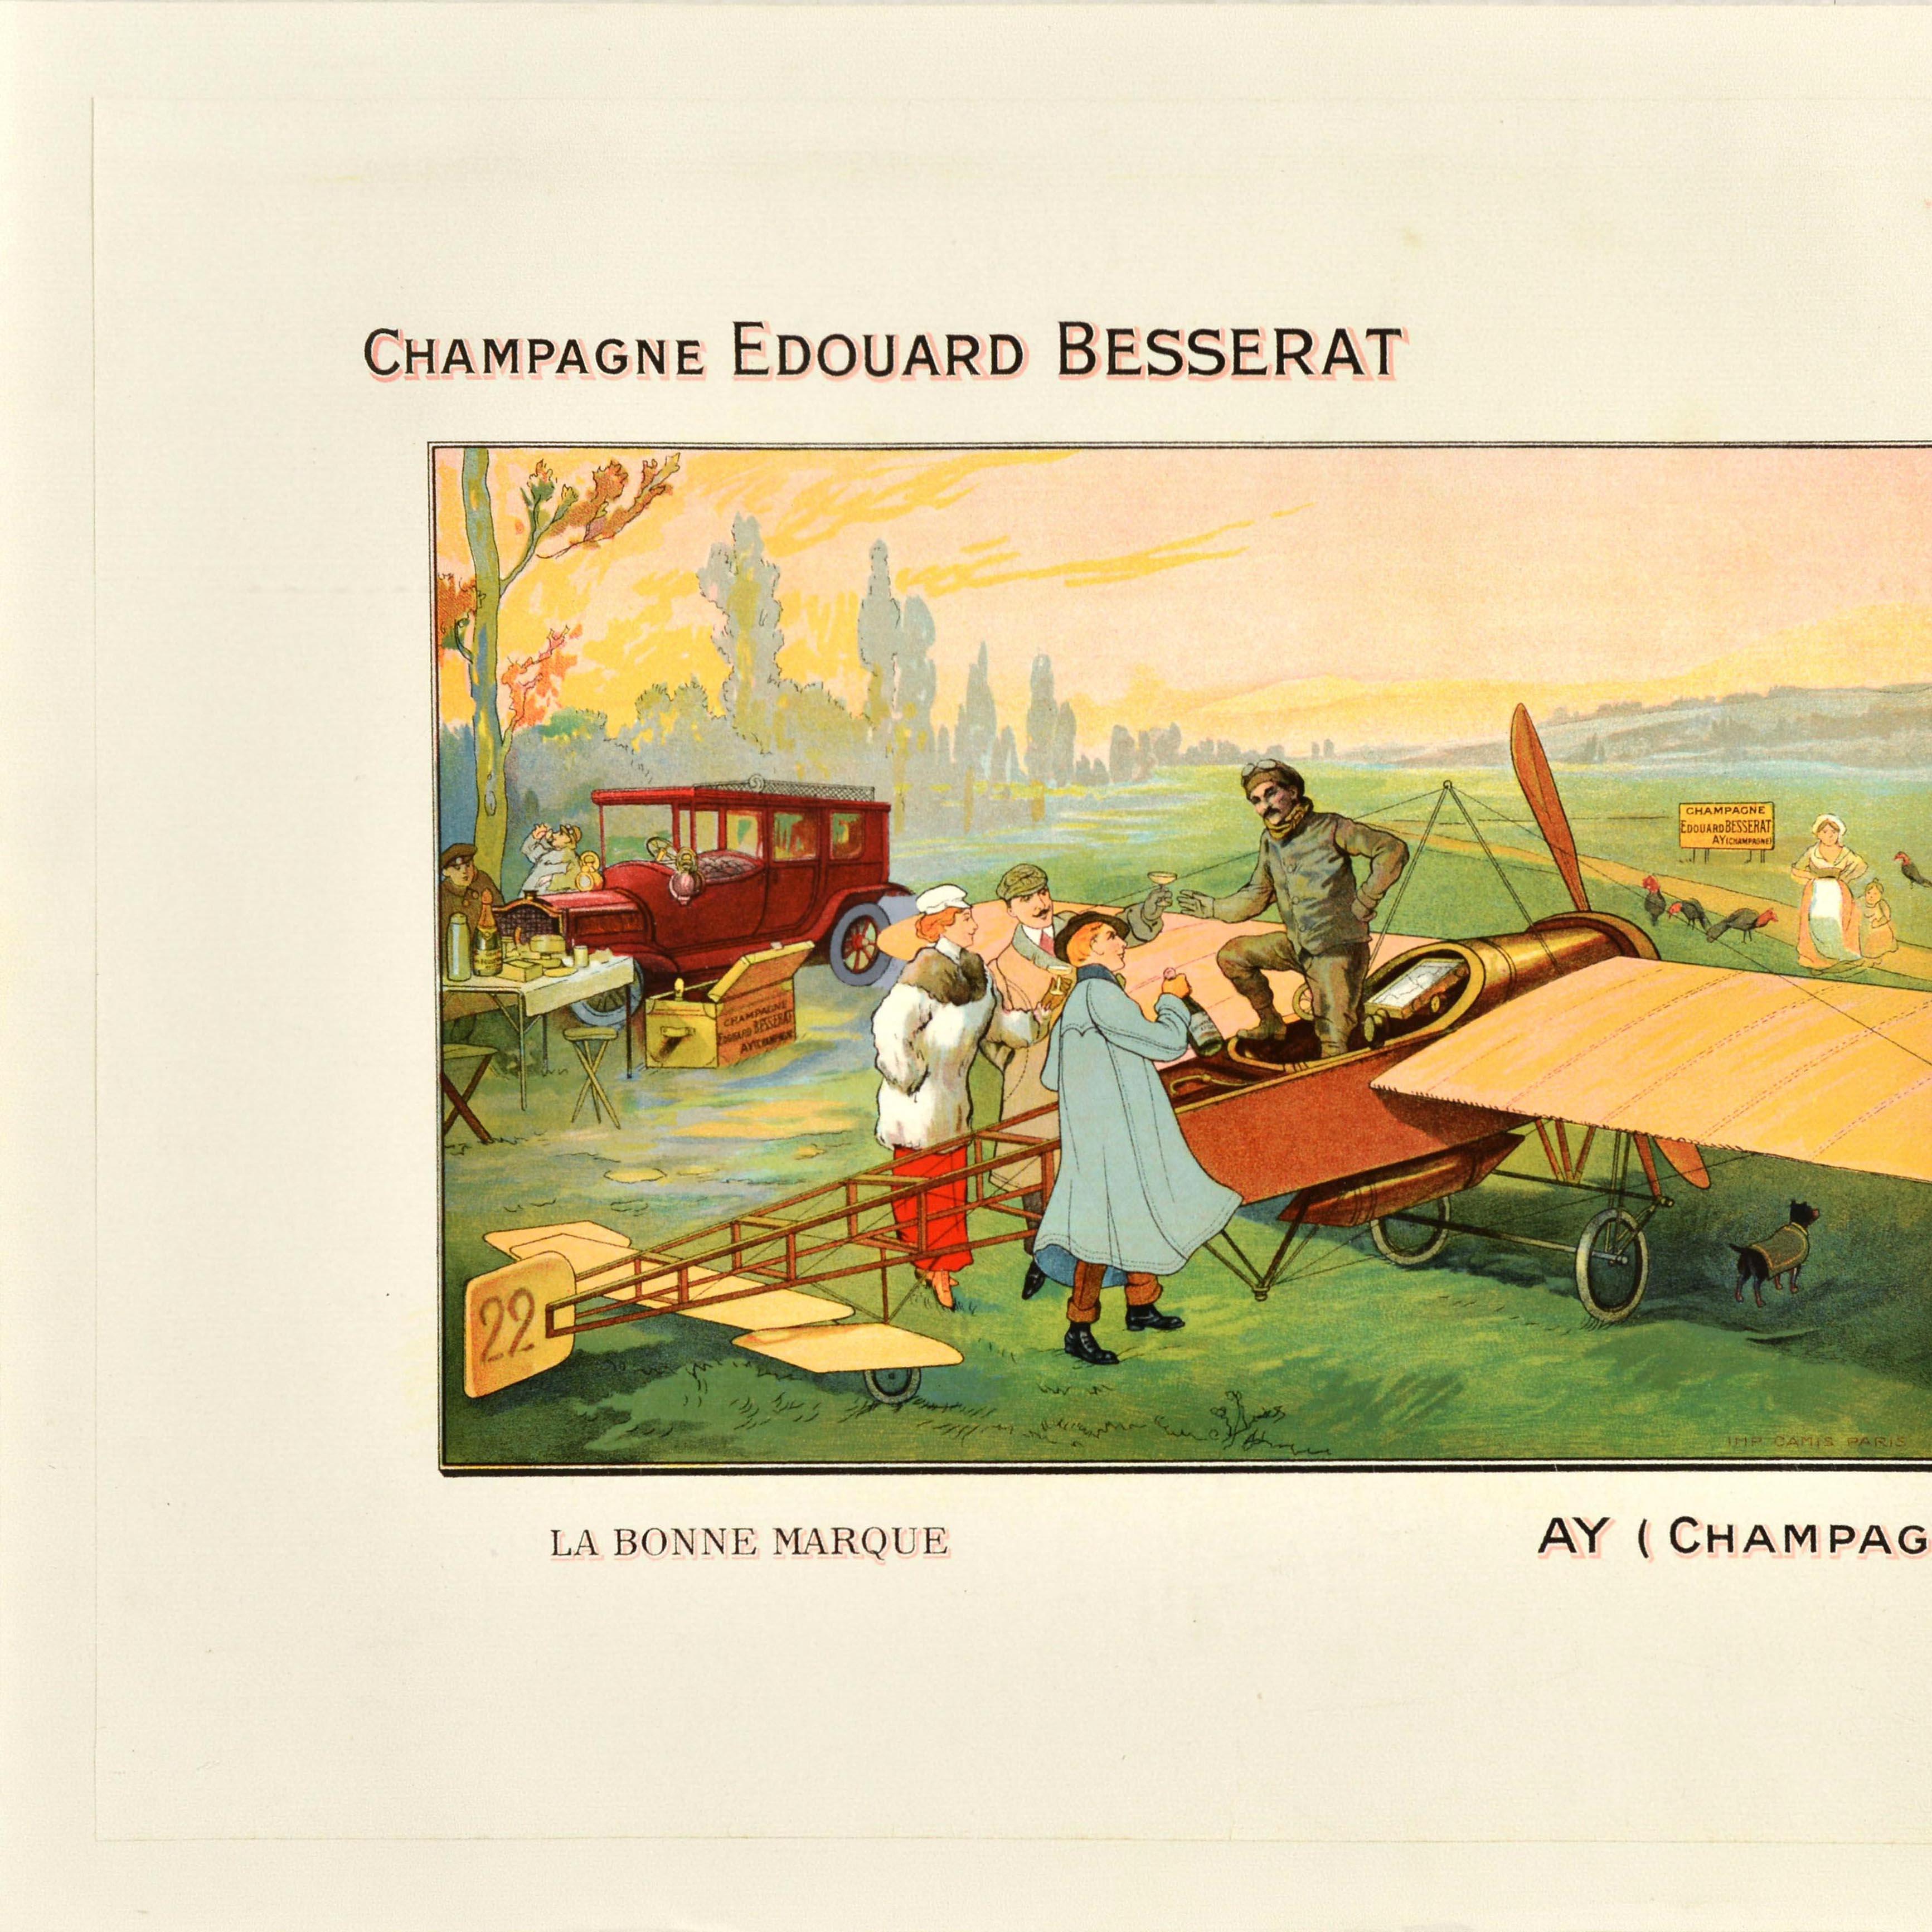 French Original Antique Drink Advertising Poster Champagne Edouard Besserat Plane Pilot For Sale